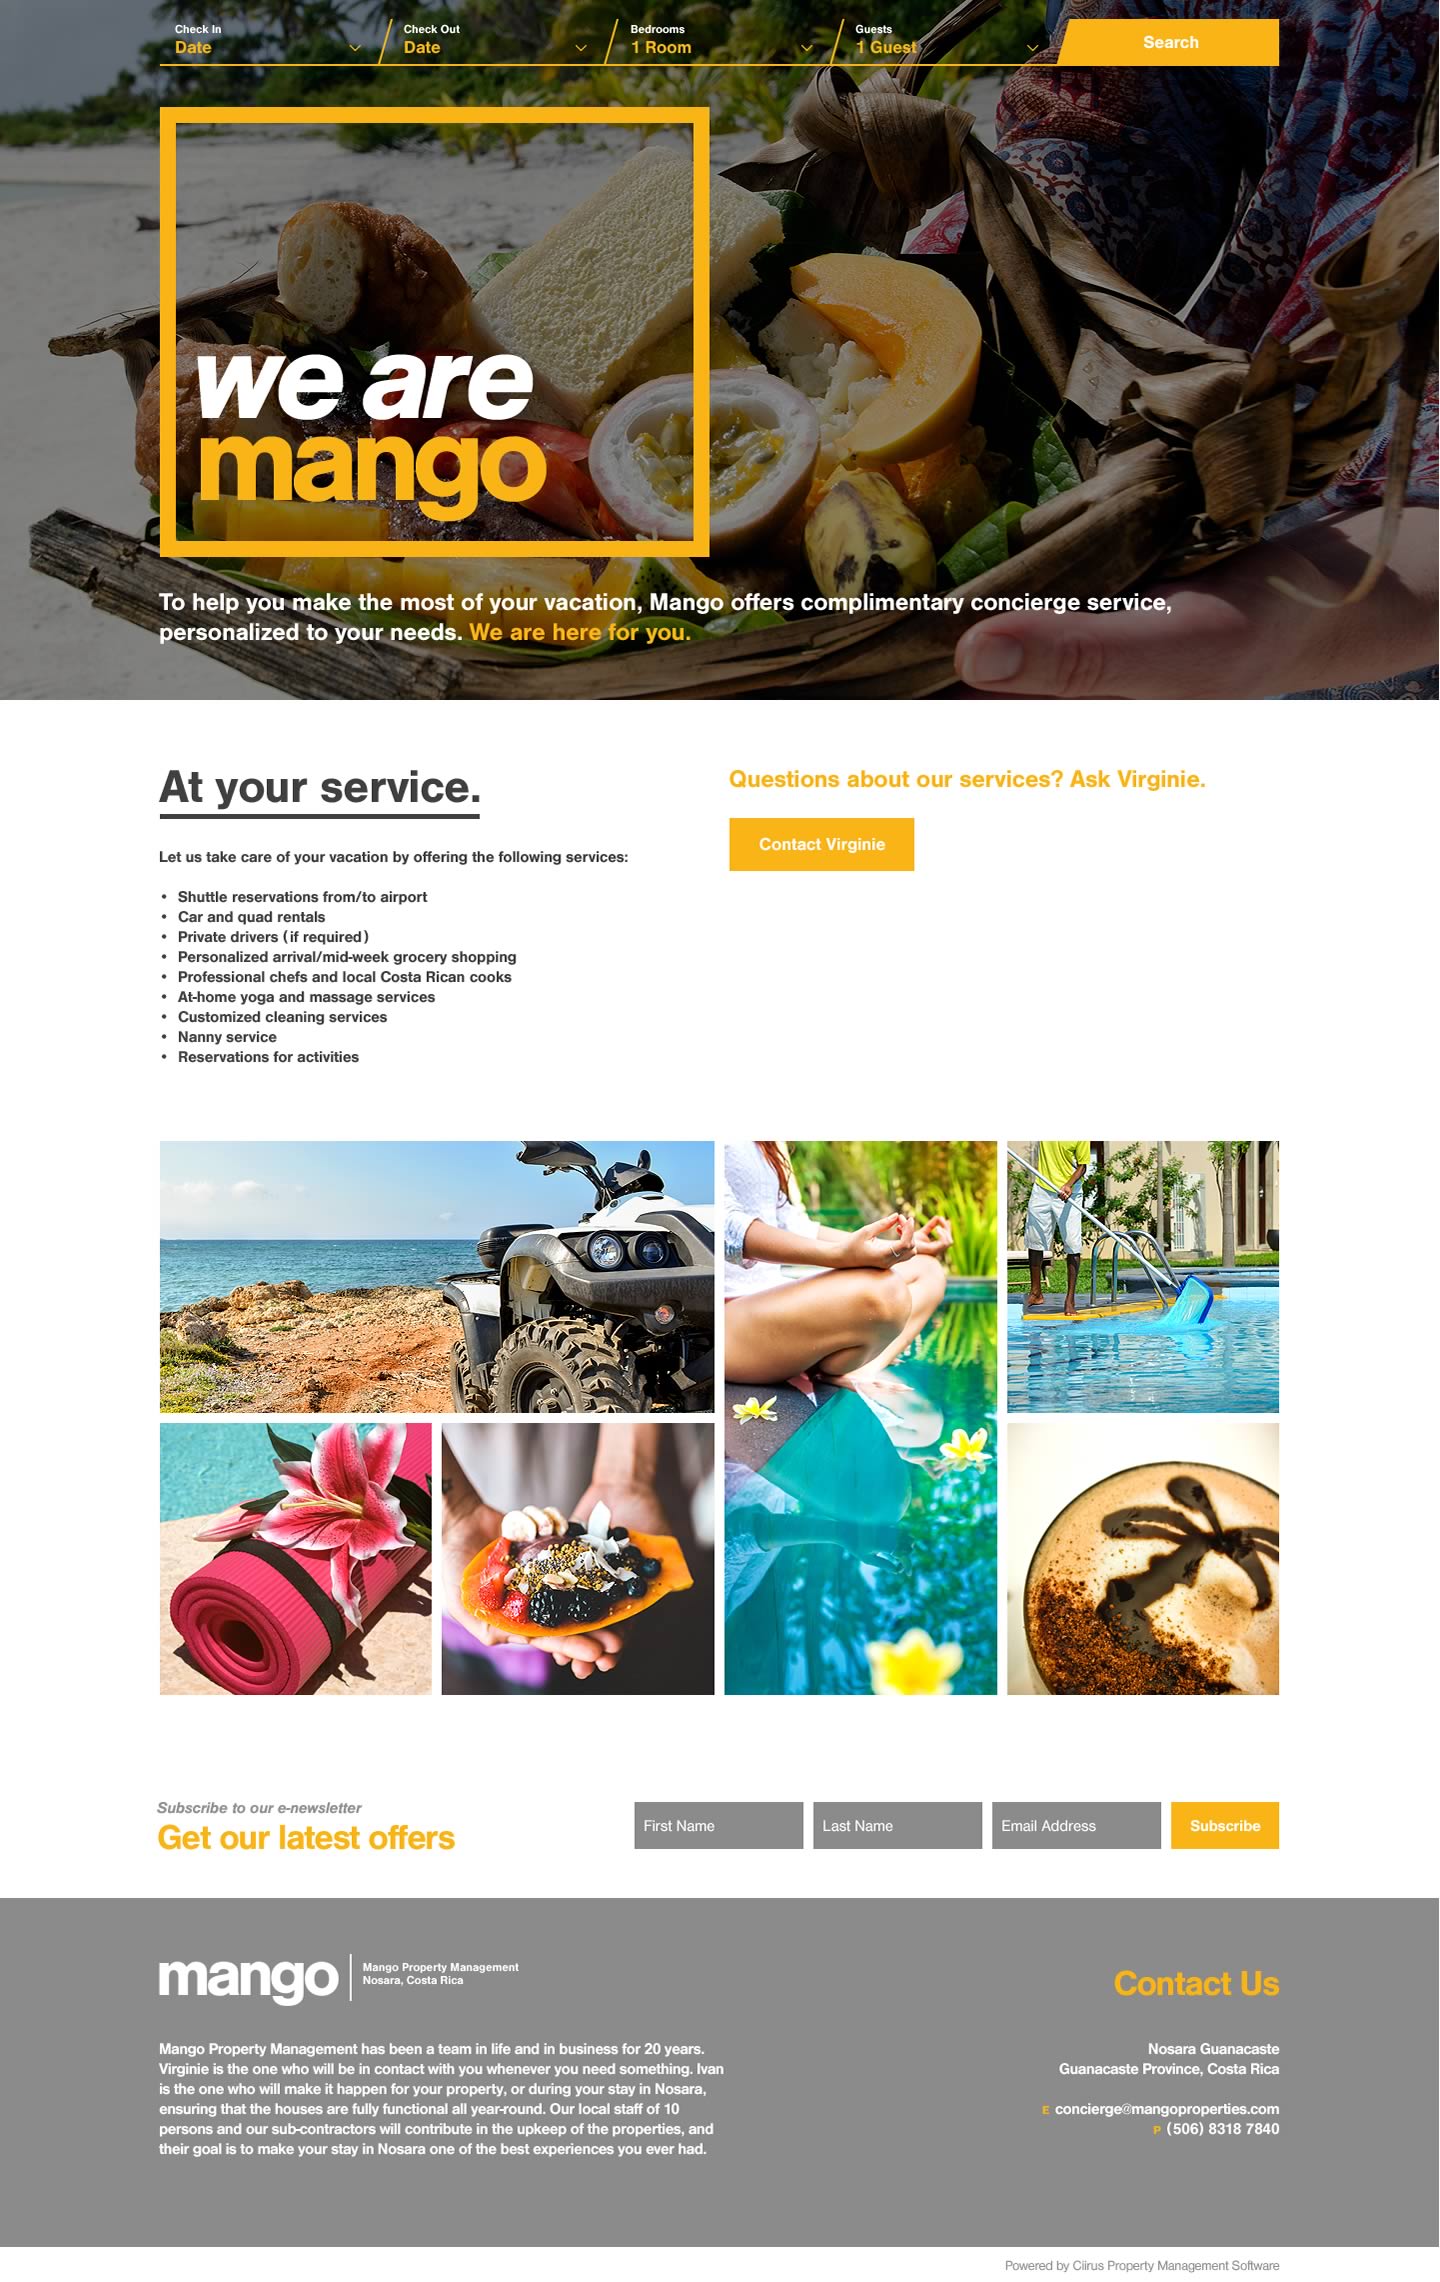 Capture of the full 'Concierge' landing page from the Mango Property Management website